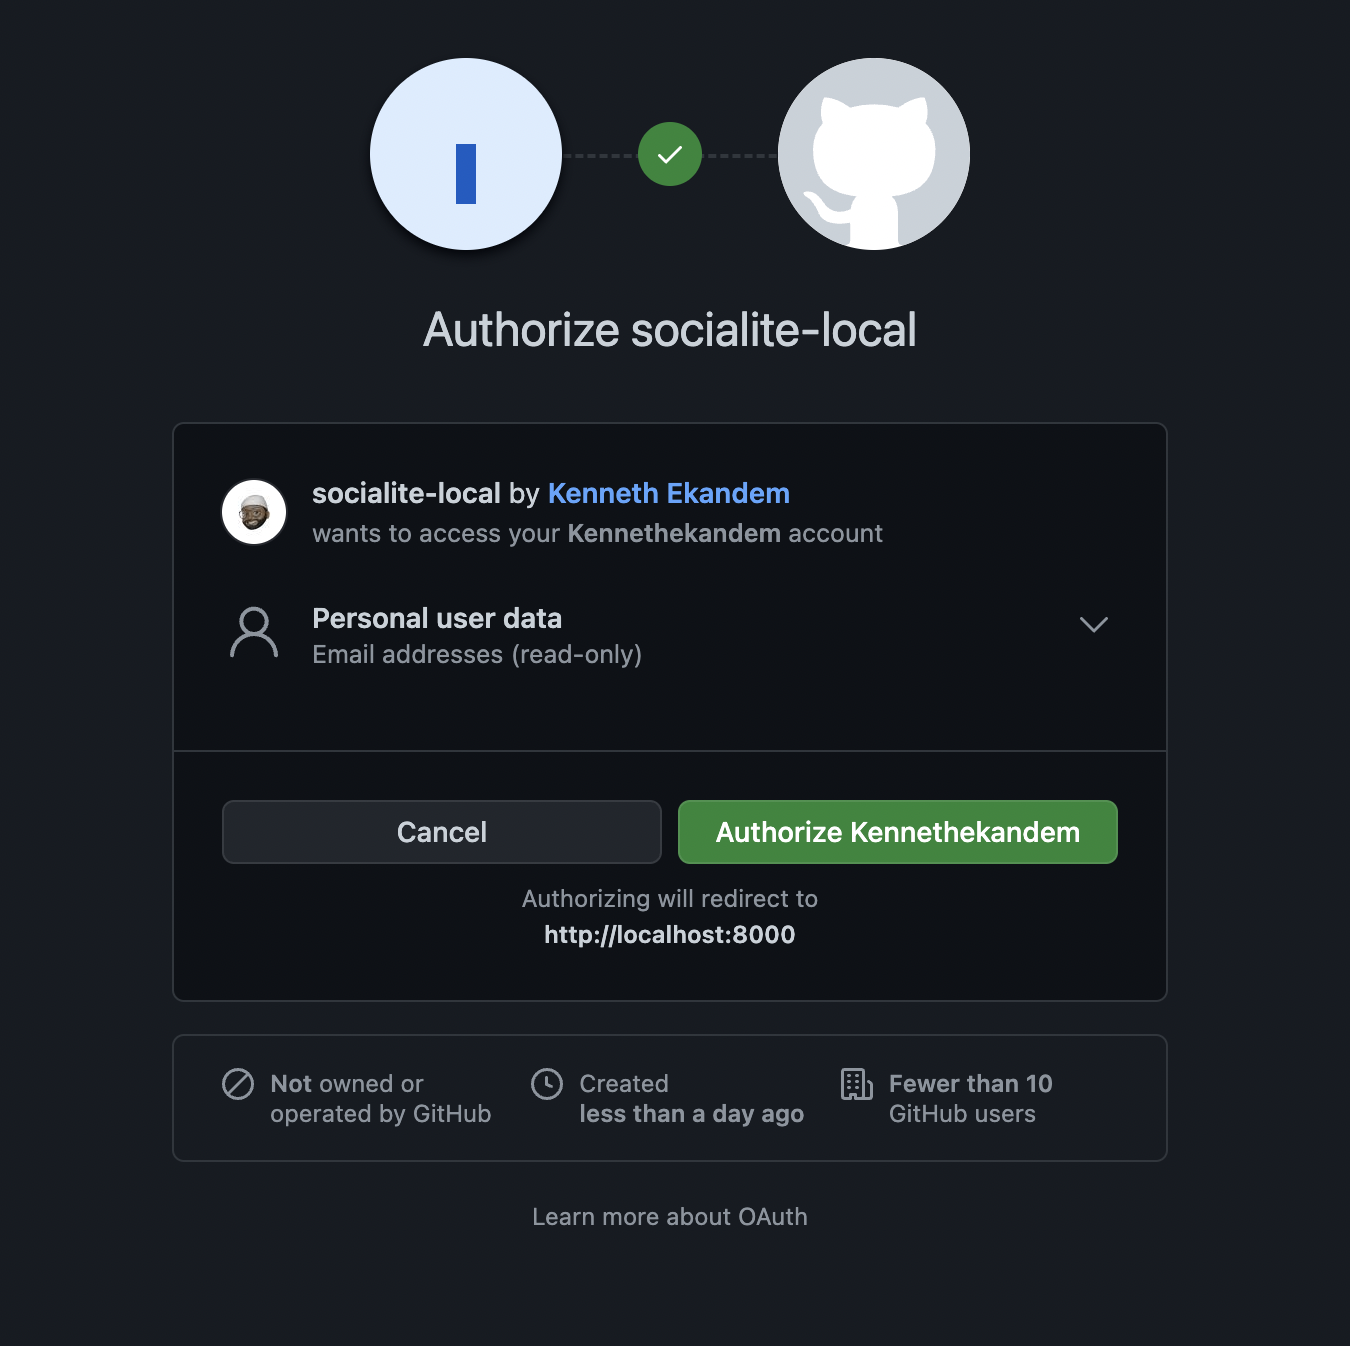 The OAuth form asking the user to confirm if they want to authorize socialite-local with GitHub